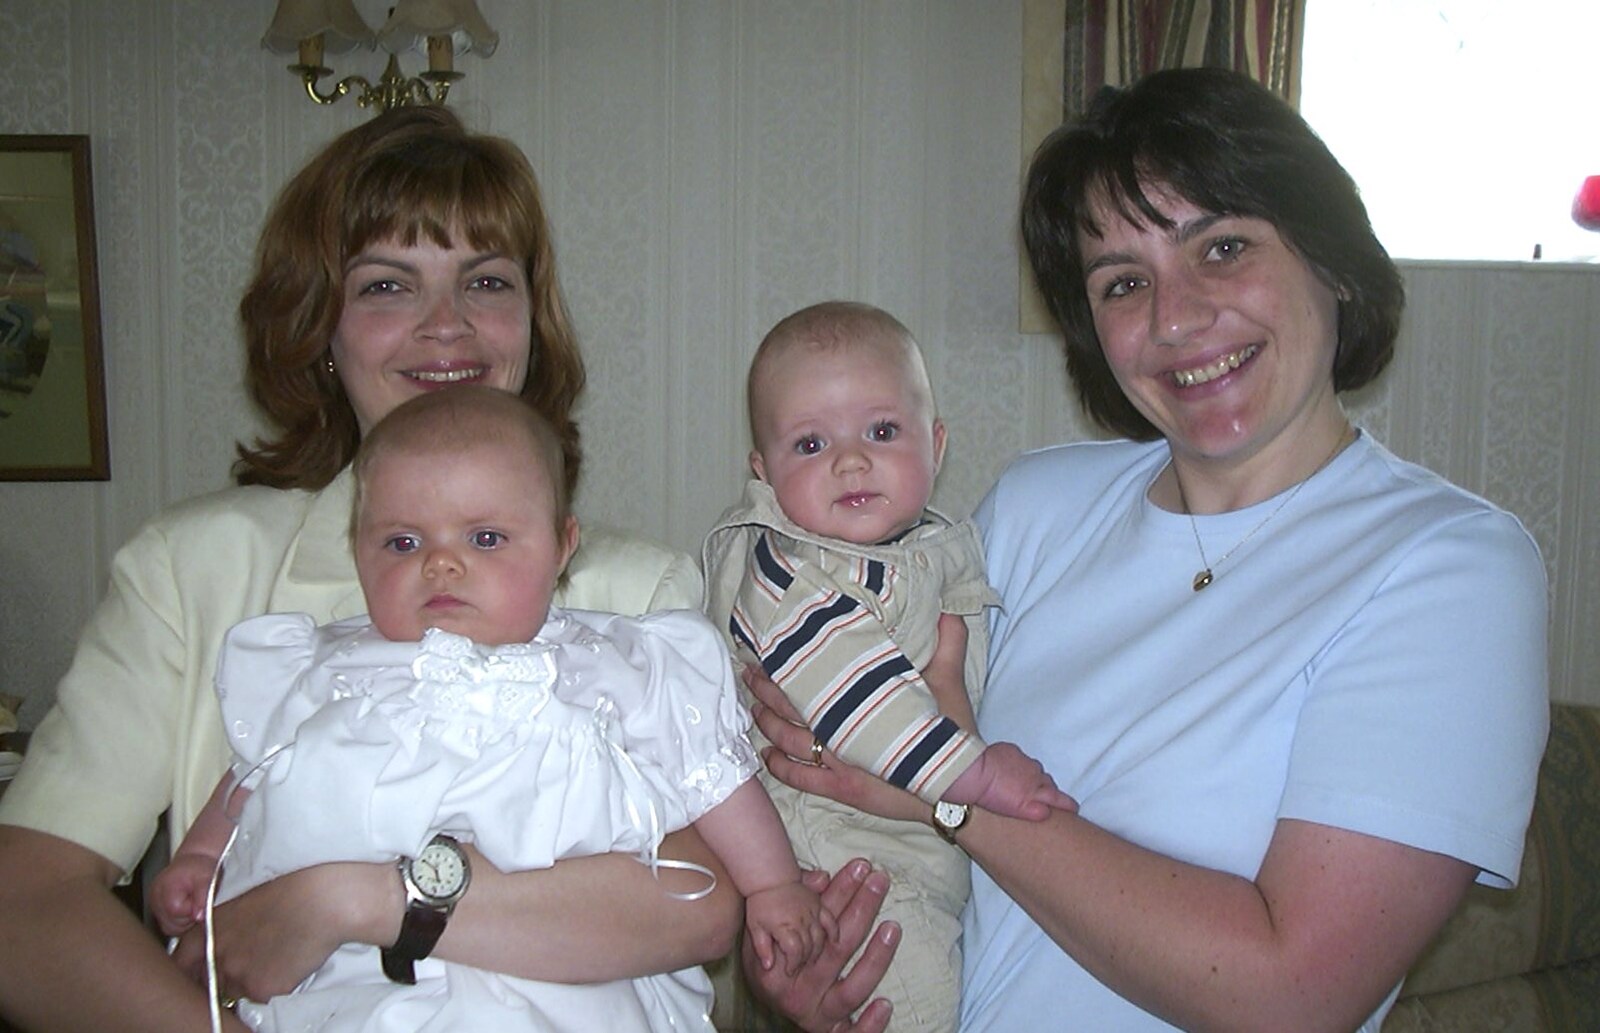 Lots of babies from Sydney's Christening, Hordle, Hampshire - 4th May 2002